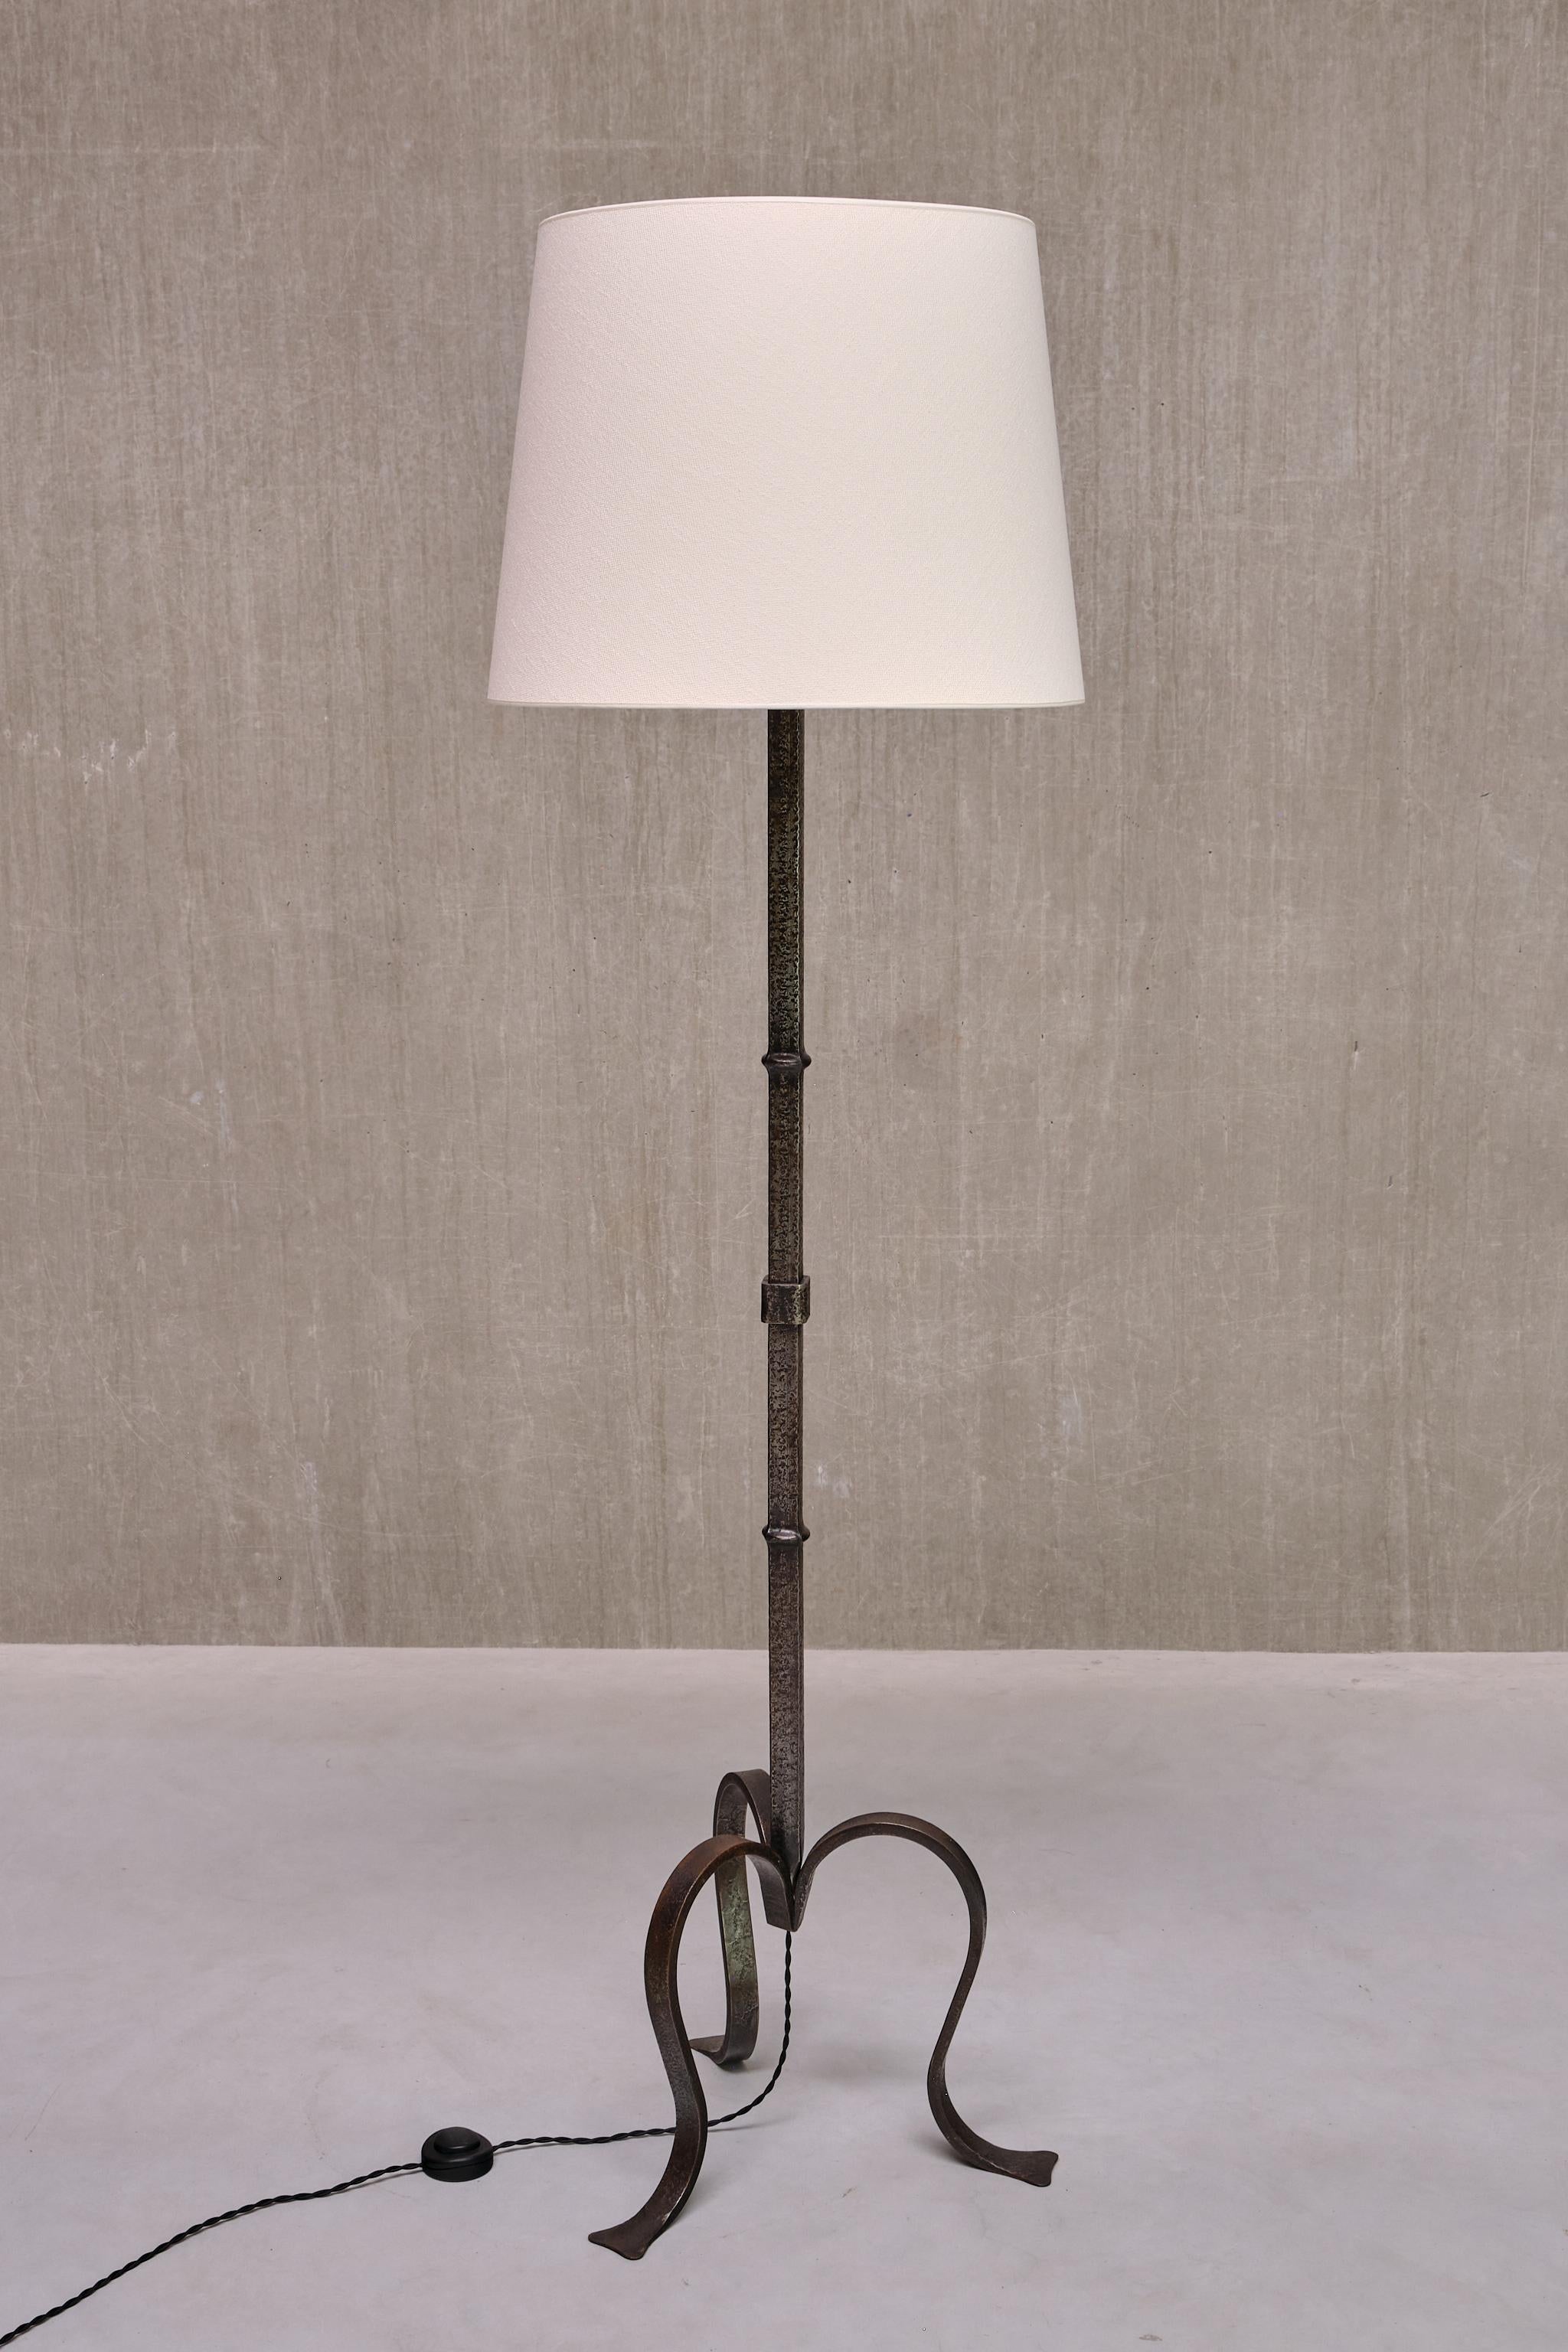 Sculptural French Modern Three Legged Floor Lamp in Wrought Iron, 1950s For Sale 4